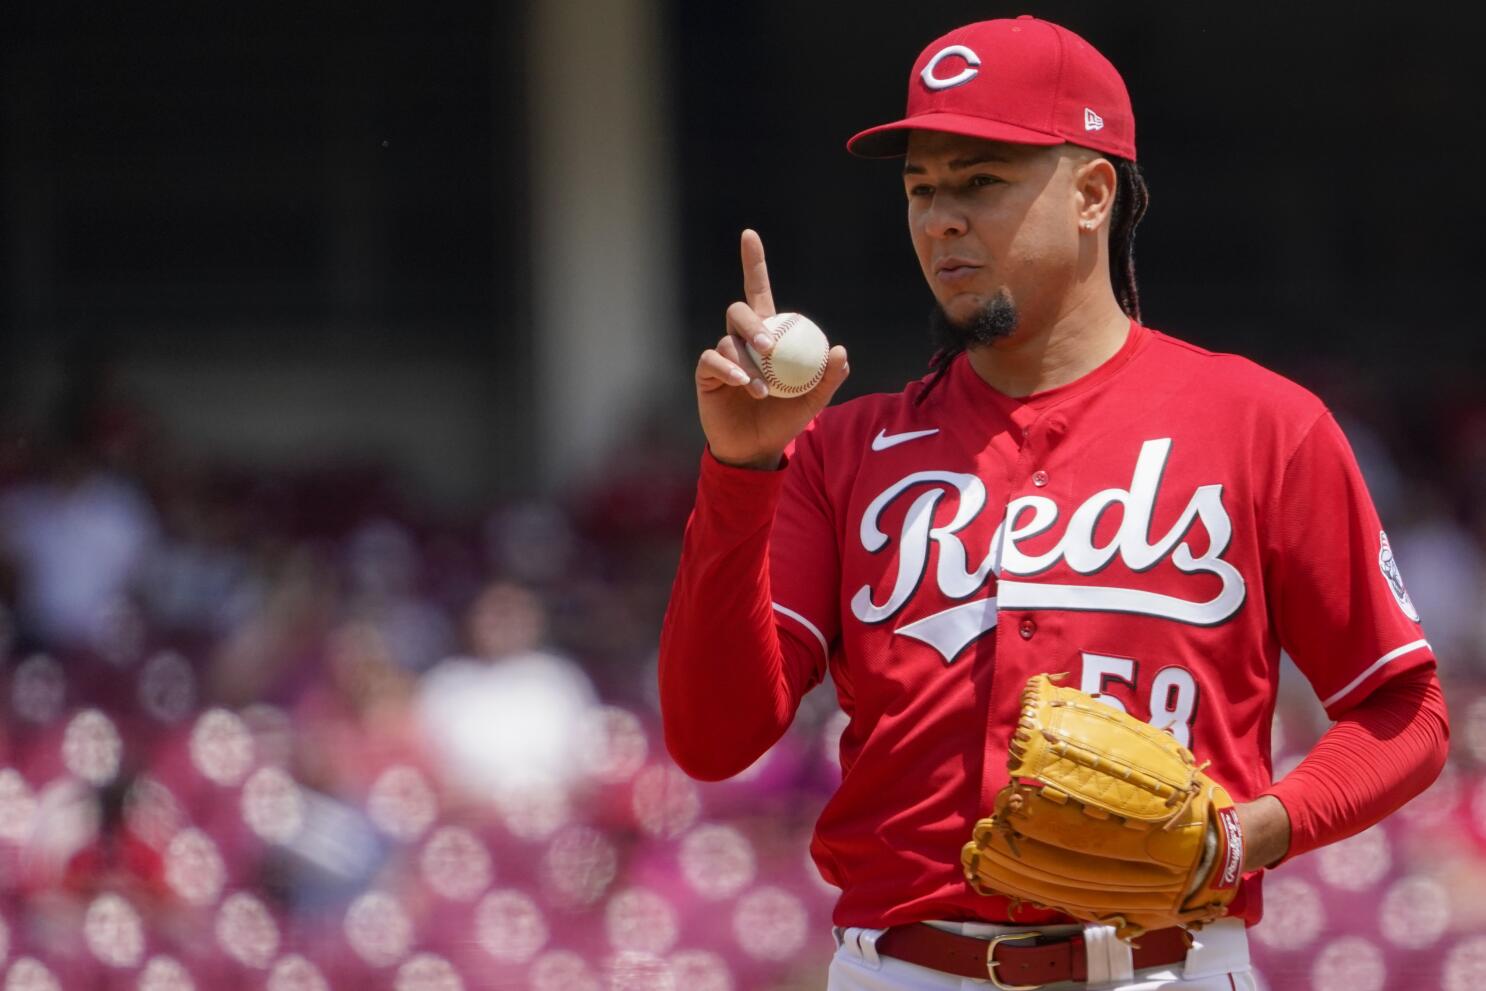 How many more starts for Luis Castillo in a Cincinnati Reds